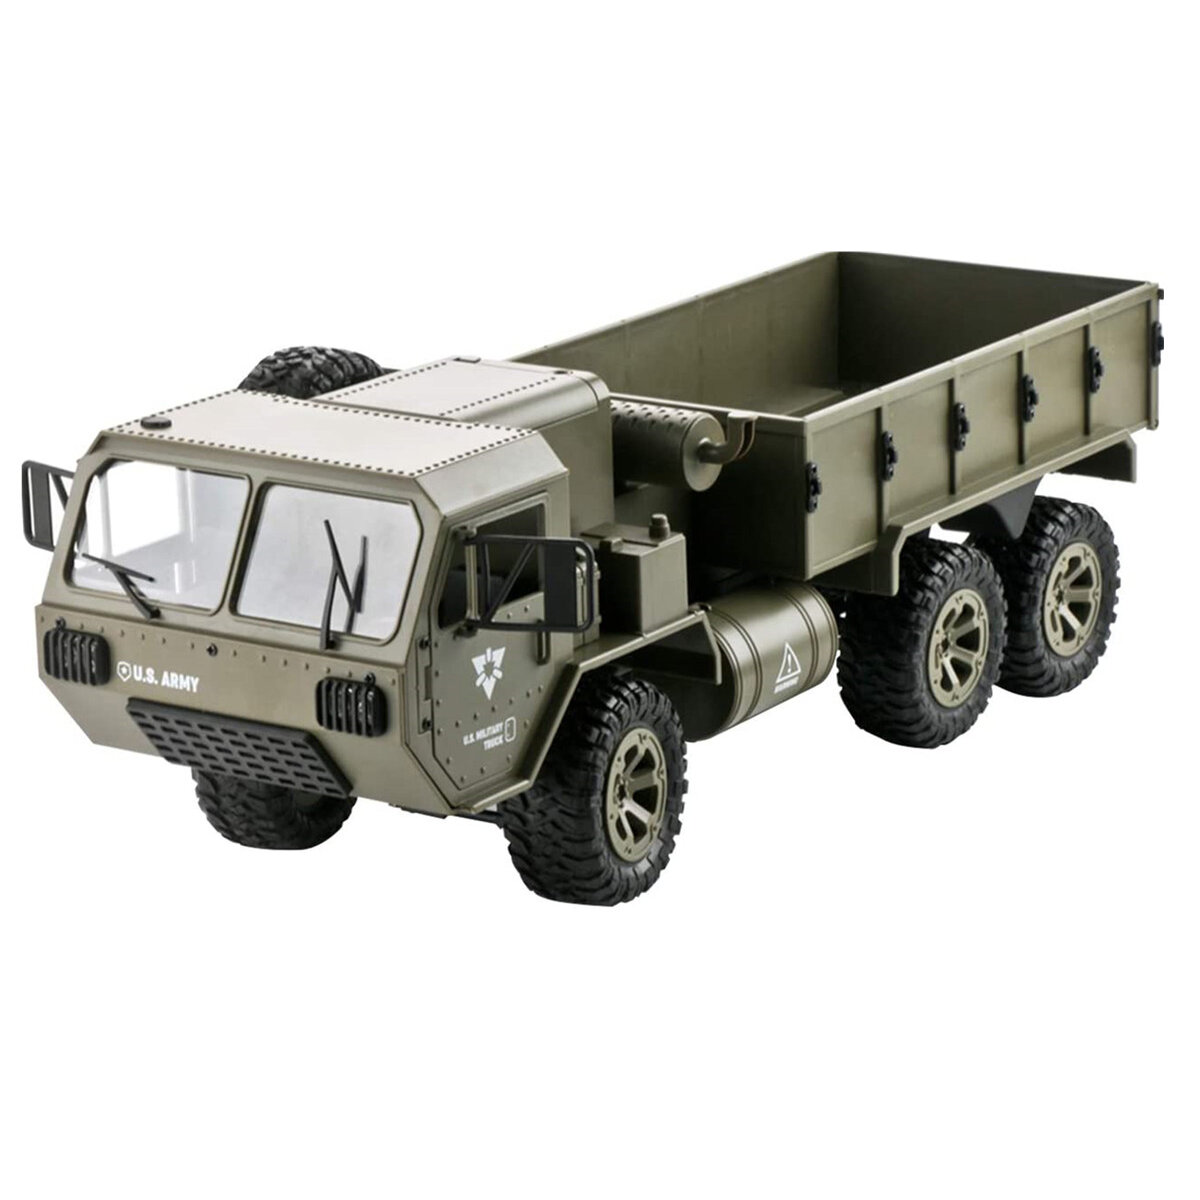 JJRC 1/16 2.4G 6WD Rc Car Proportional Control US Army Military Truck RTR Model Toys